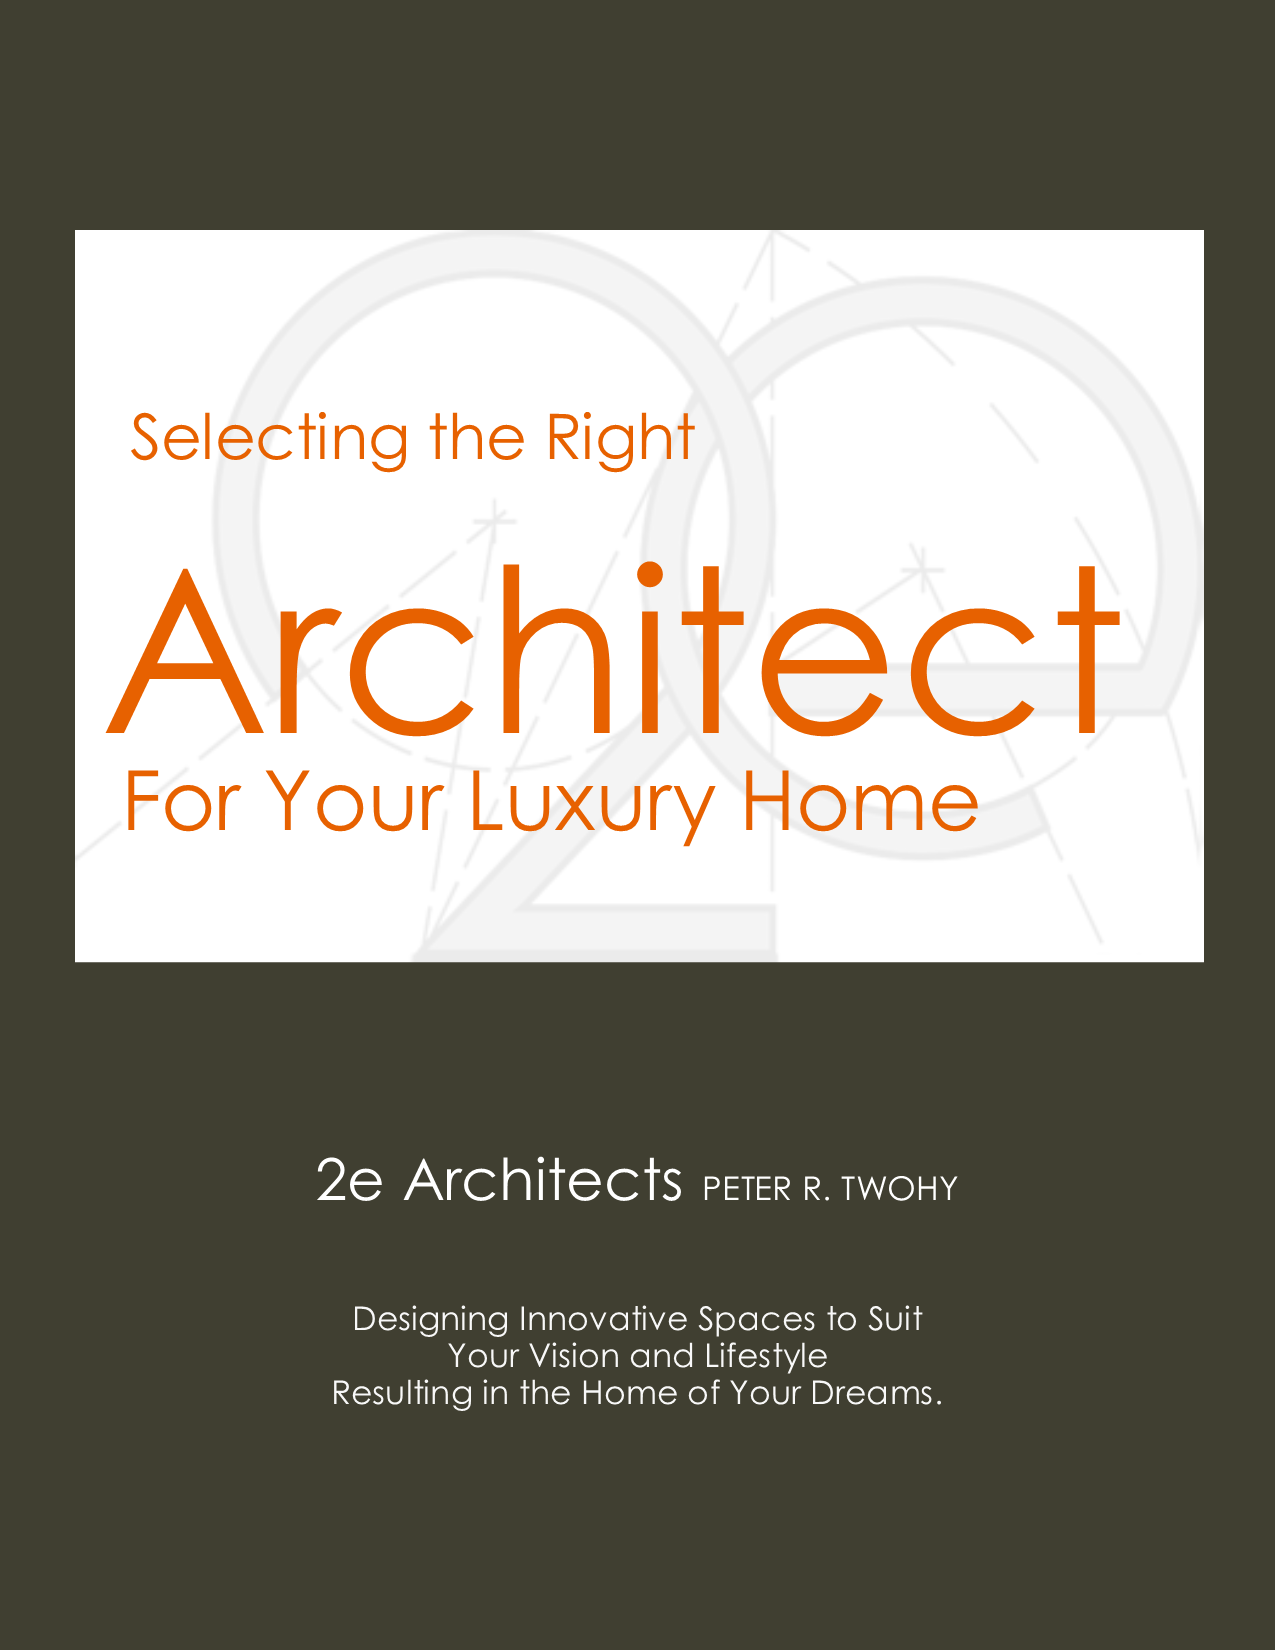 Selecting the Right Architect For Your Luxury Home